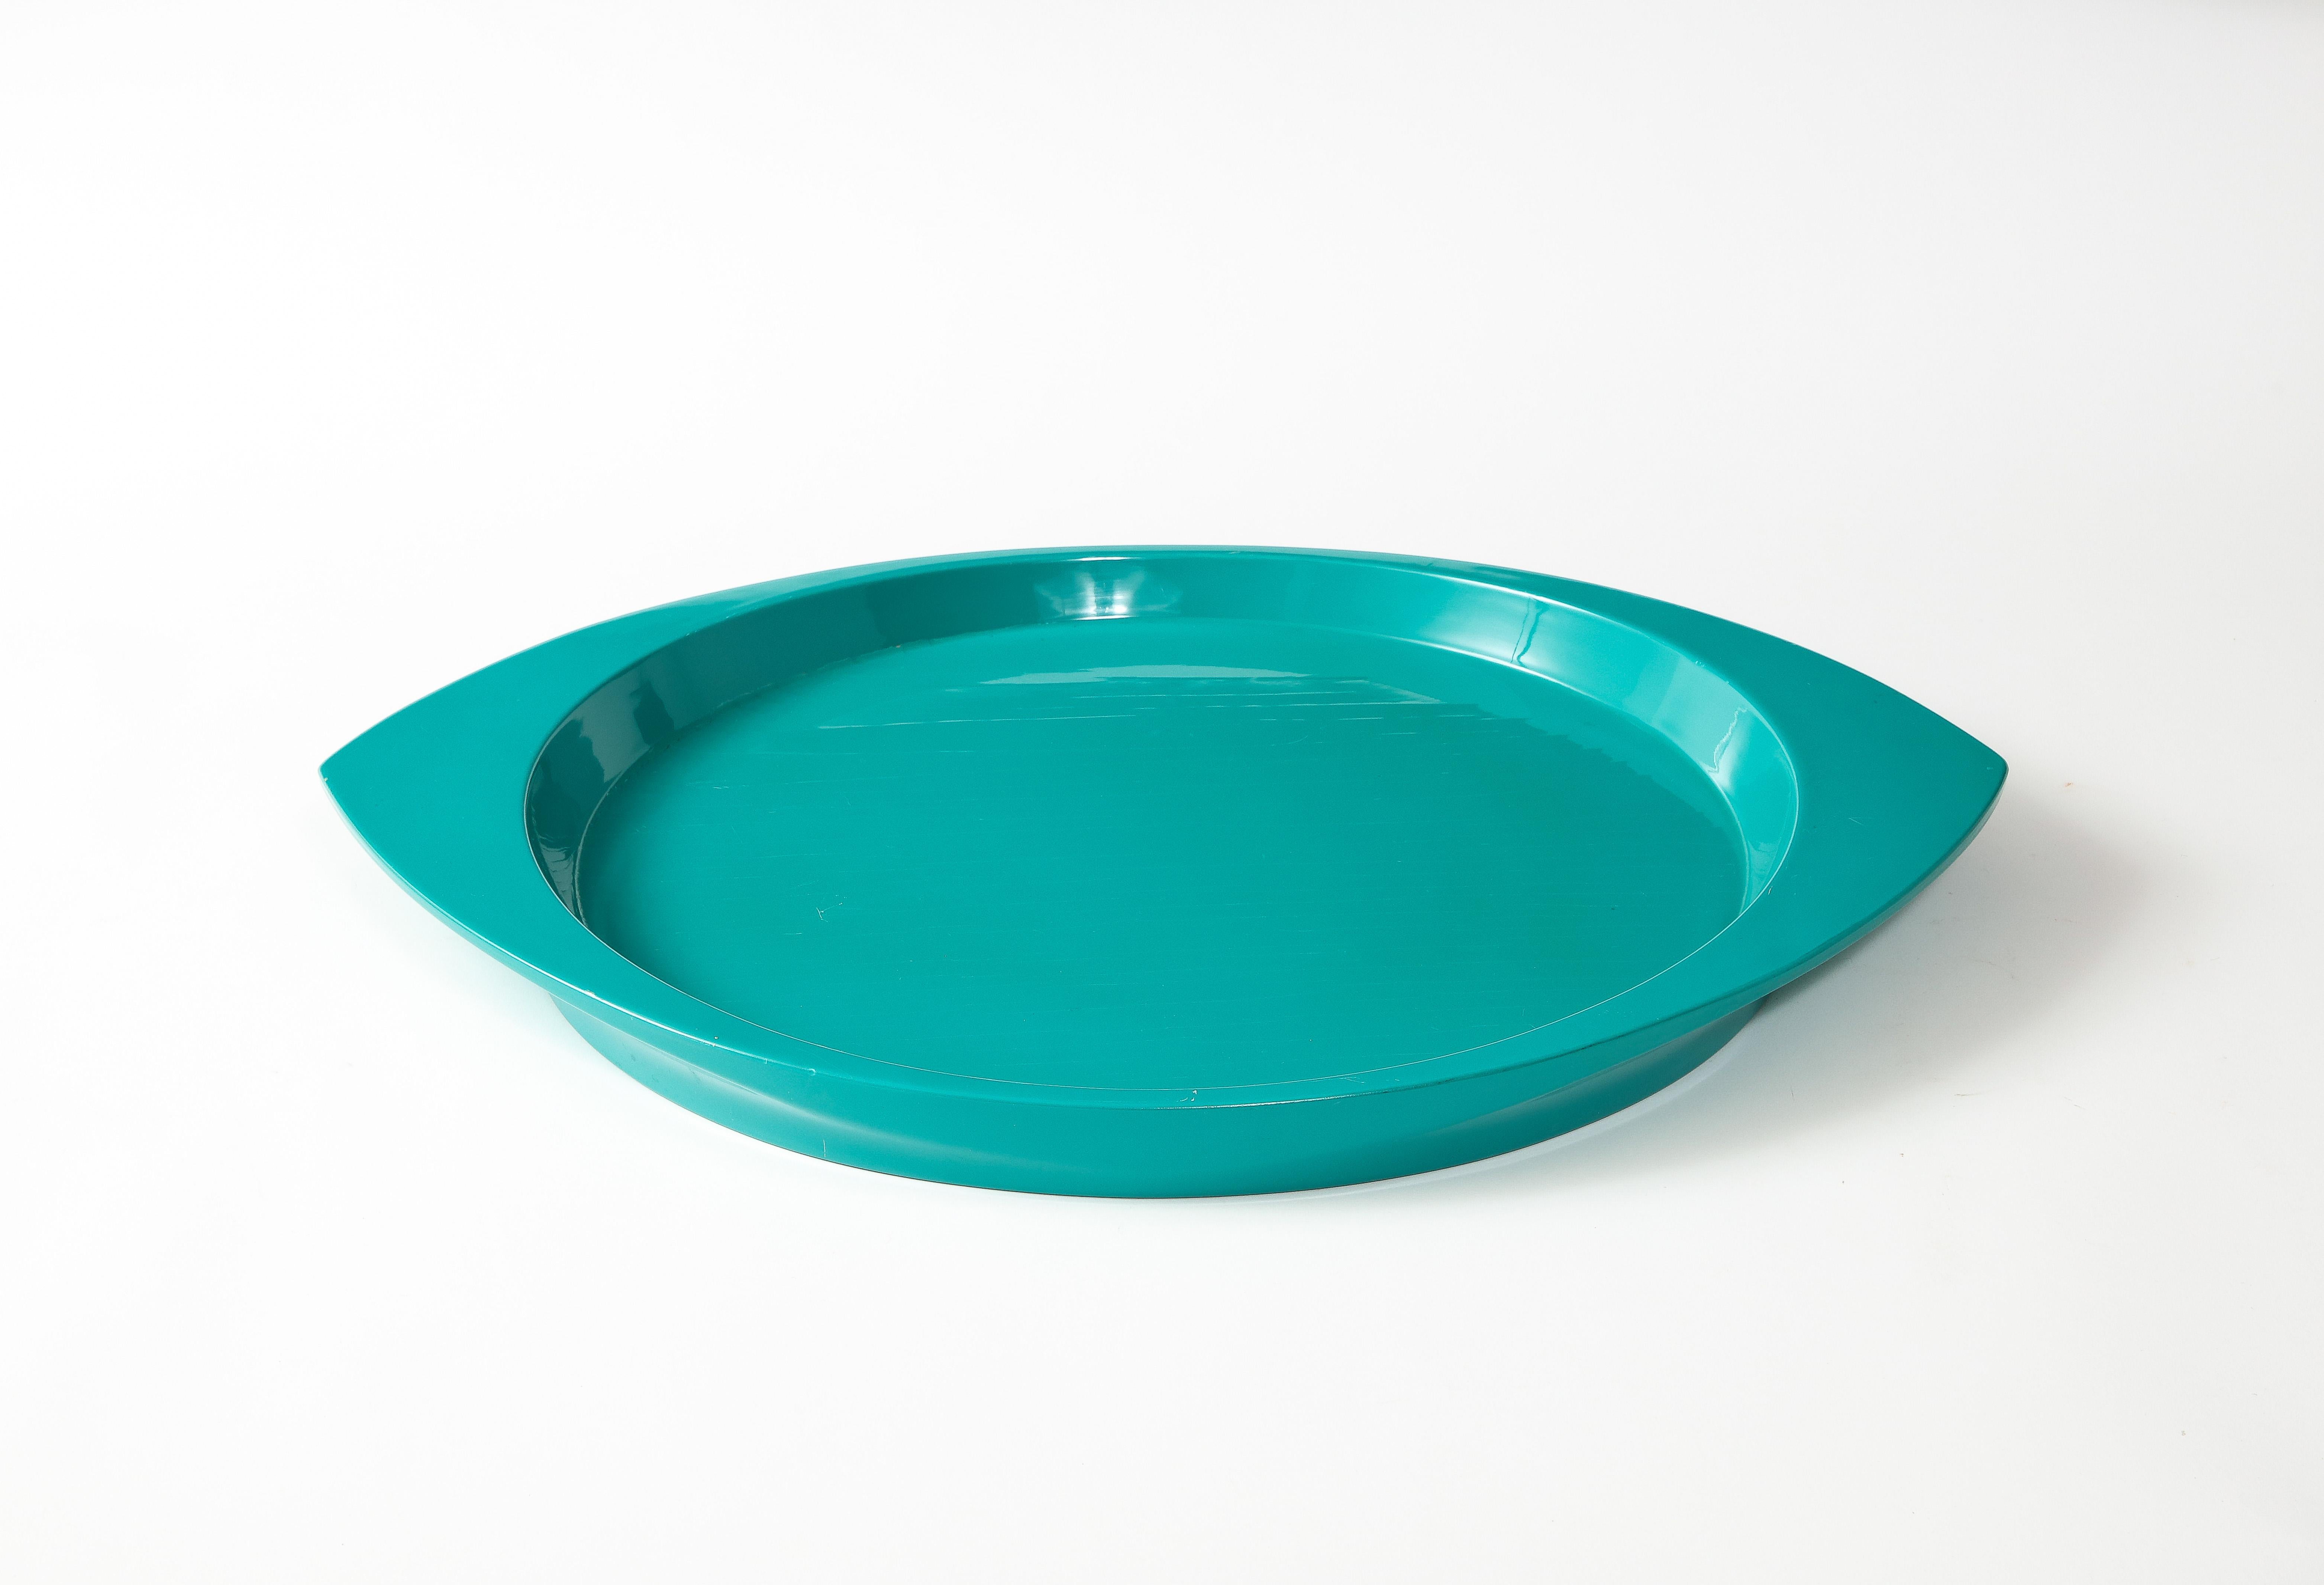 Lacquer Jens H. Quistgaard Tray Manufactured By Dansk Designs, Denmark, 1960's For Sale